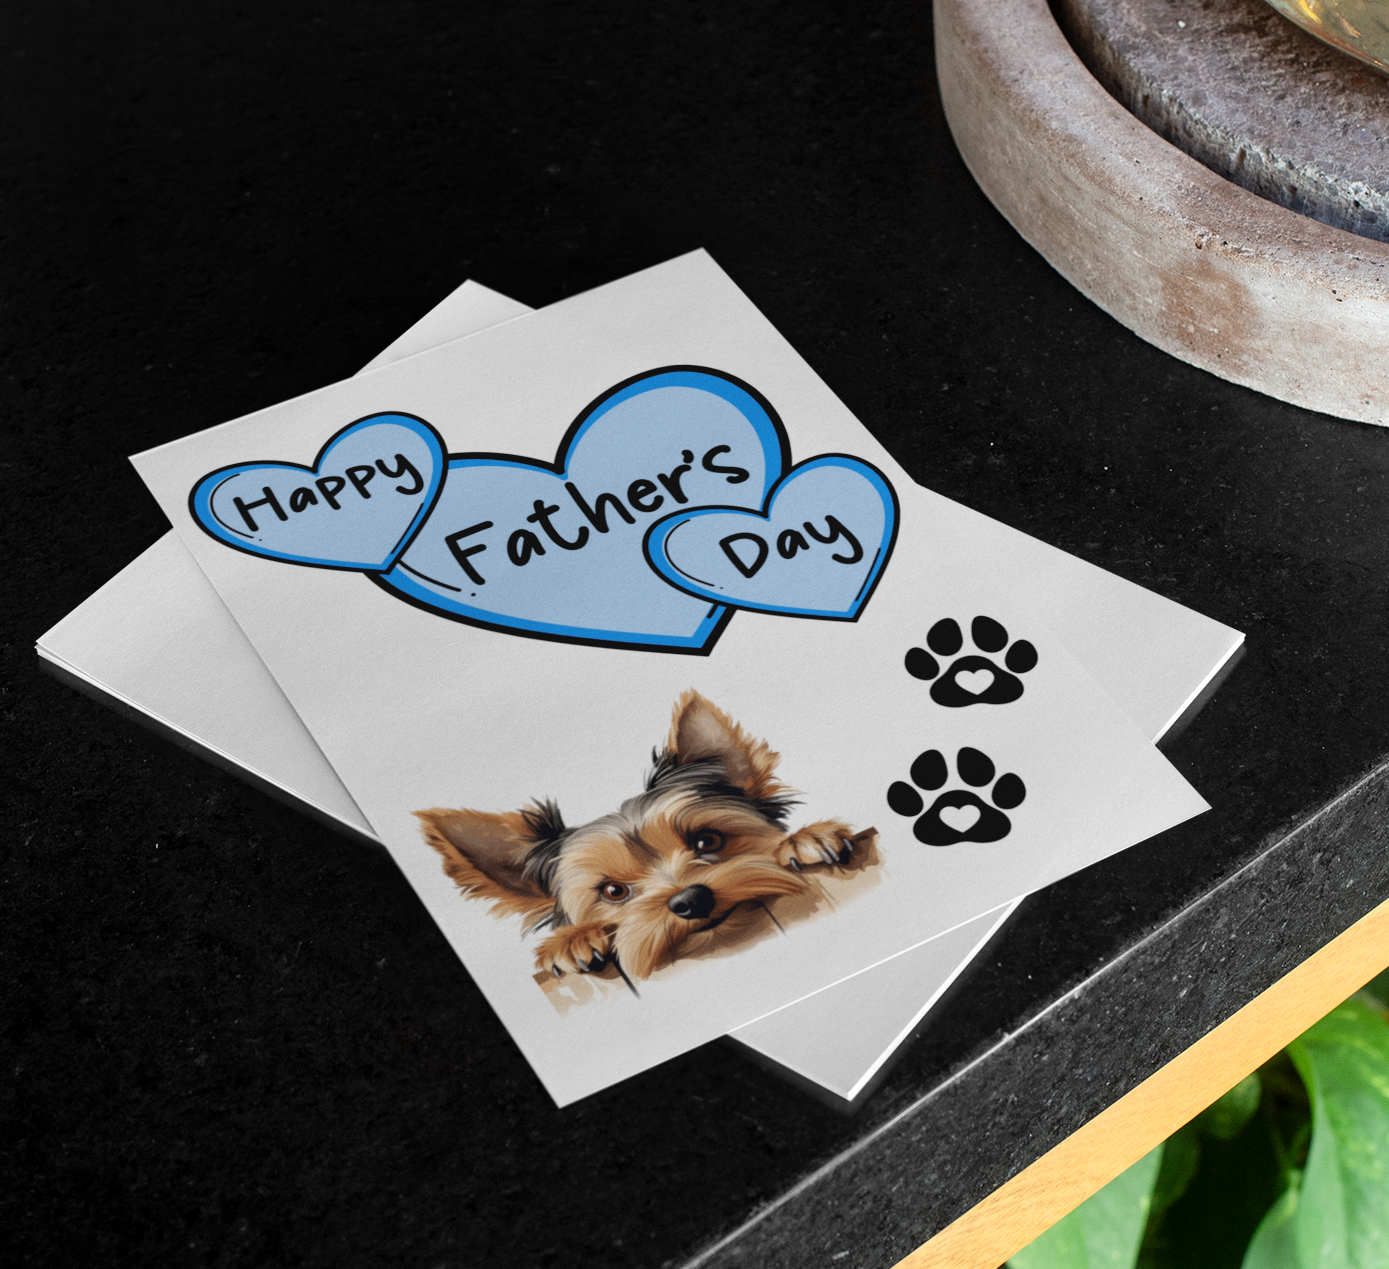 Yorkshire Terrier Father's Day Card - Nice Cute Fun Pet Dog Puppy Owner Novelty Greeting Card